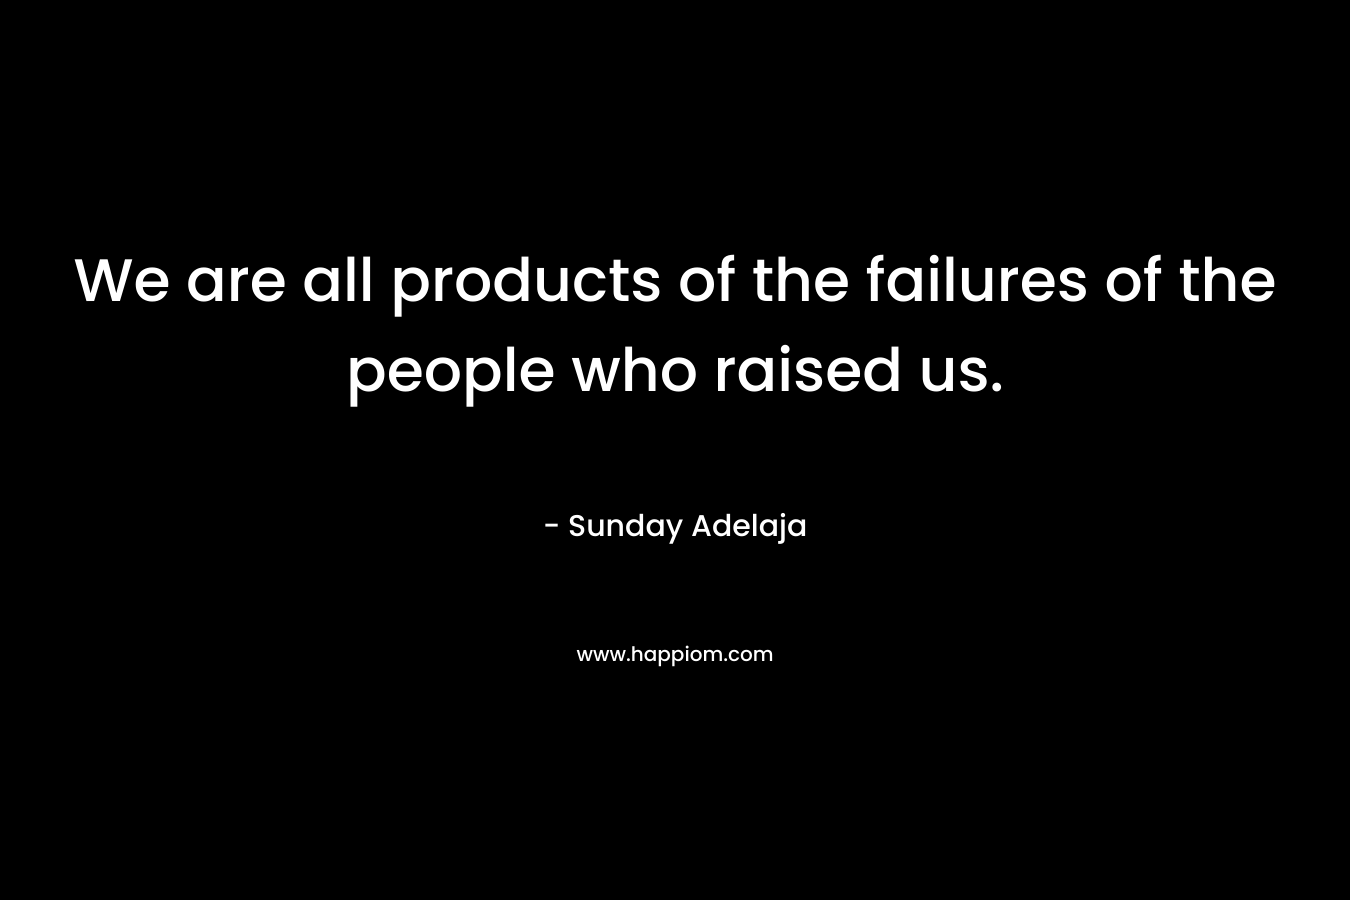 We are all products of the failures of the people who raised us.